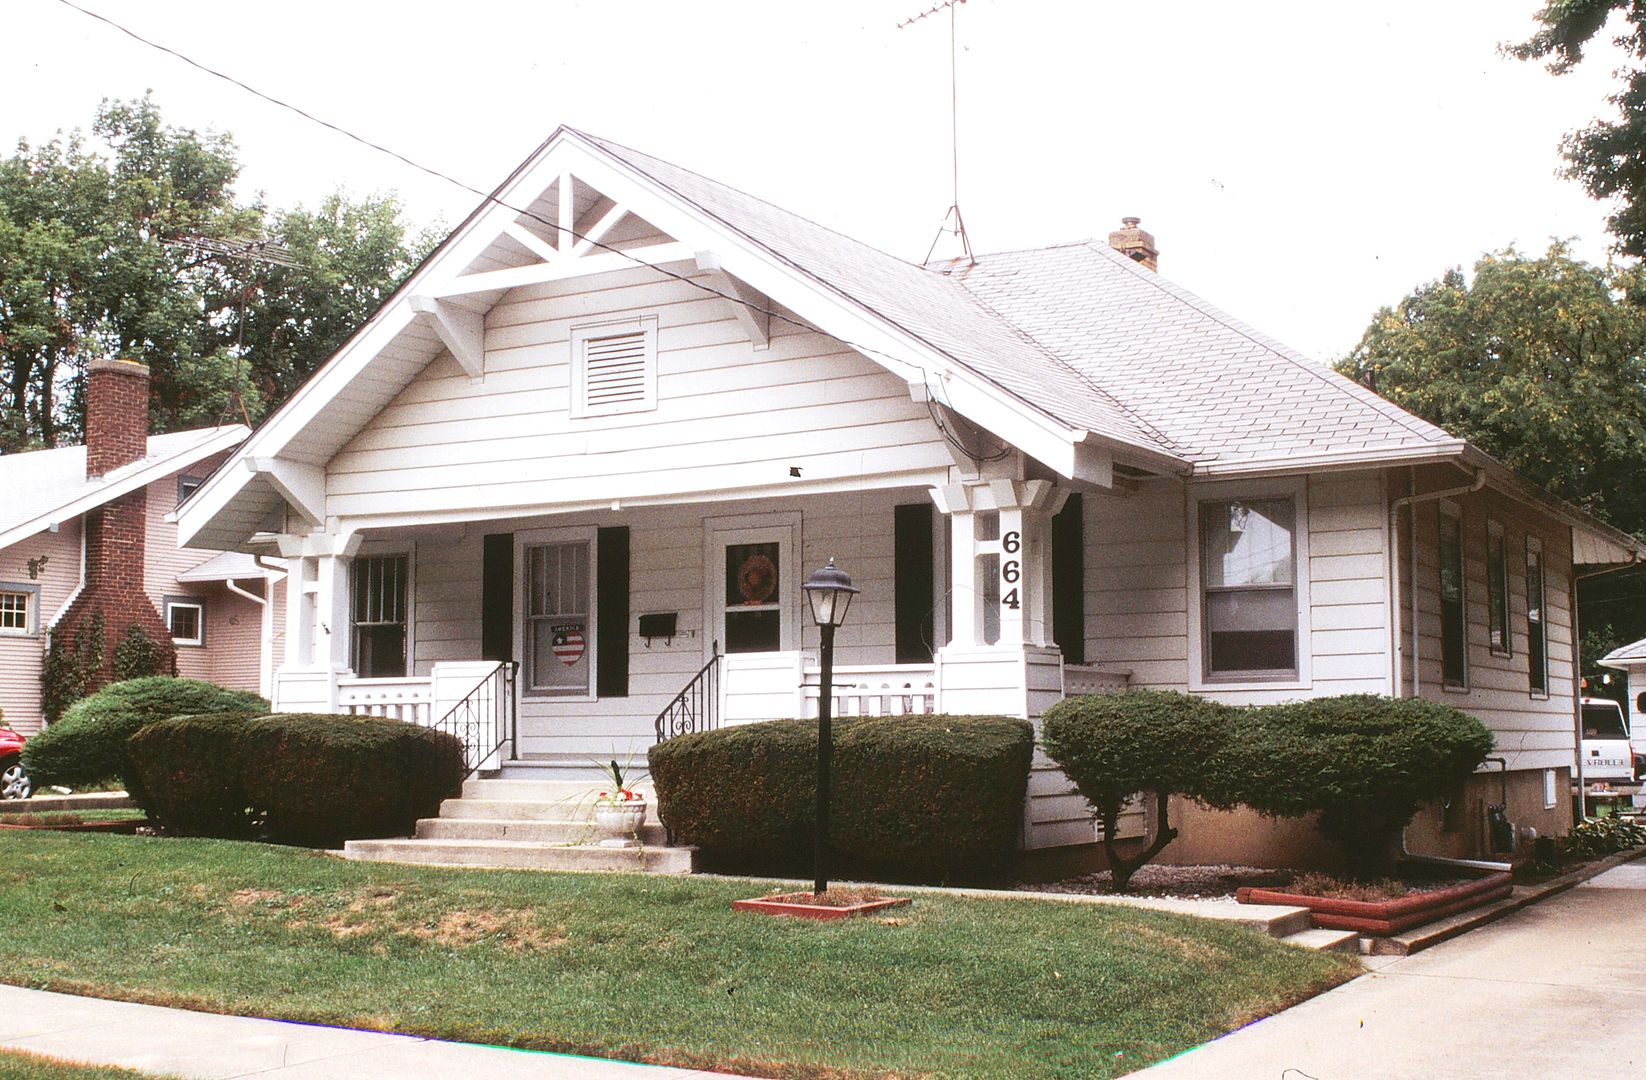 Heres an Elsmore in Elgin, Illinois. Were any of these beautiful bungalows built in Richmond?